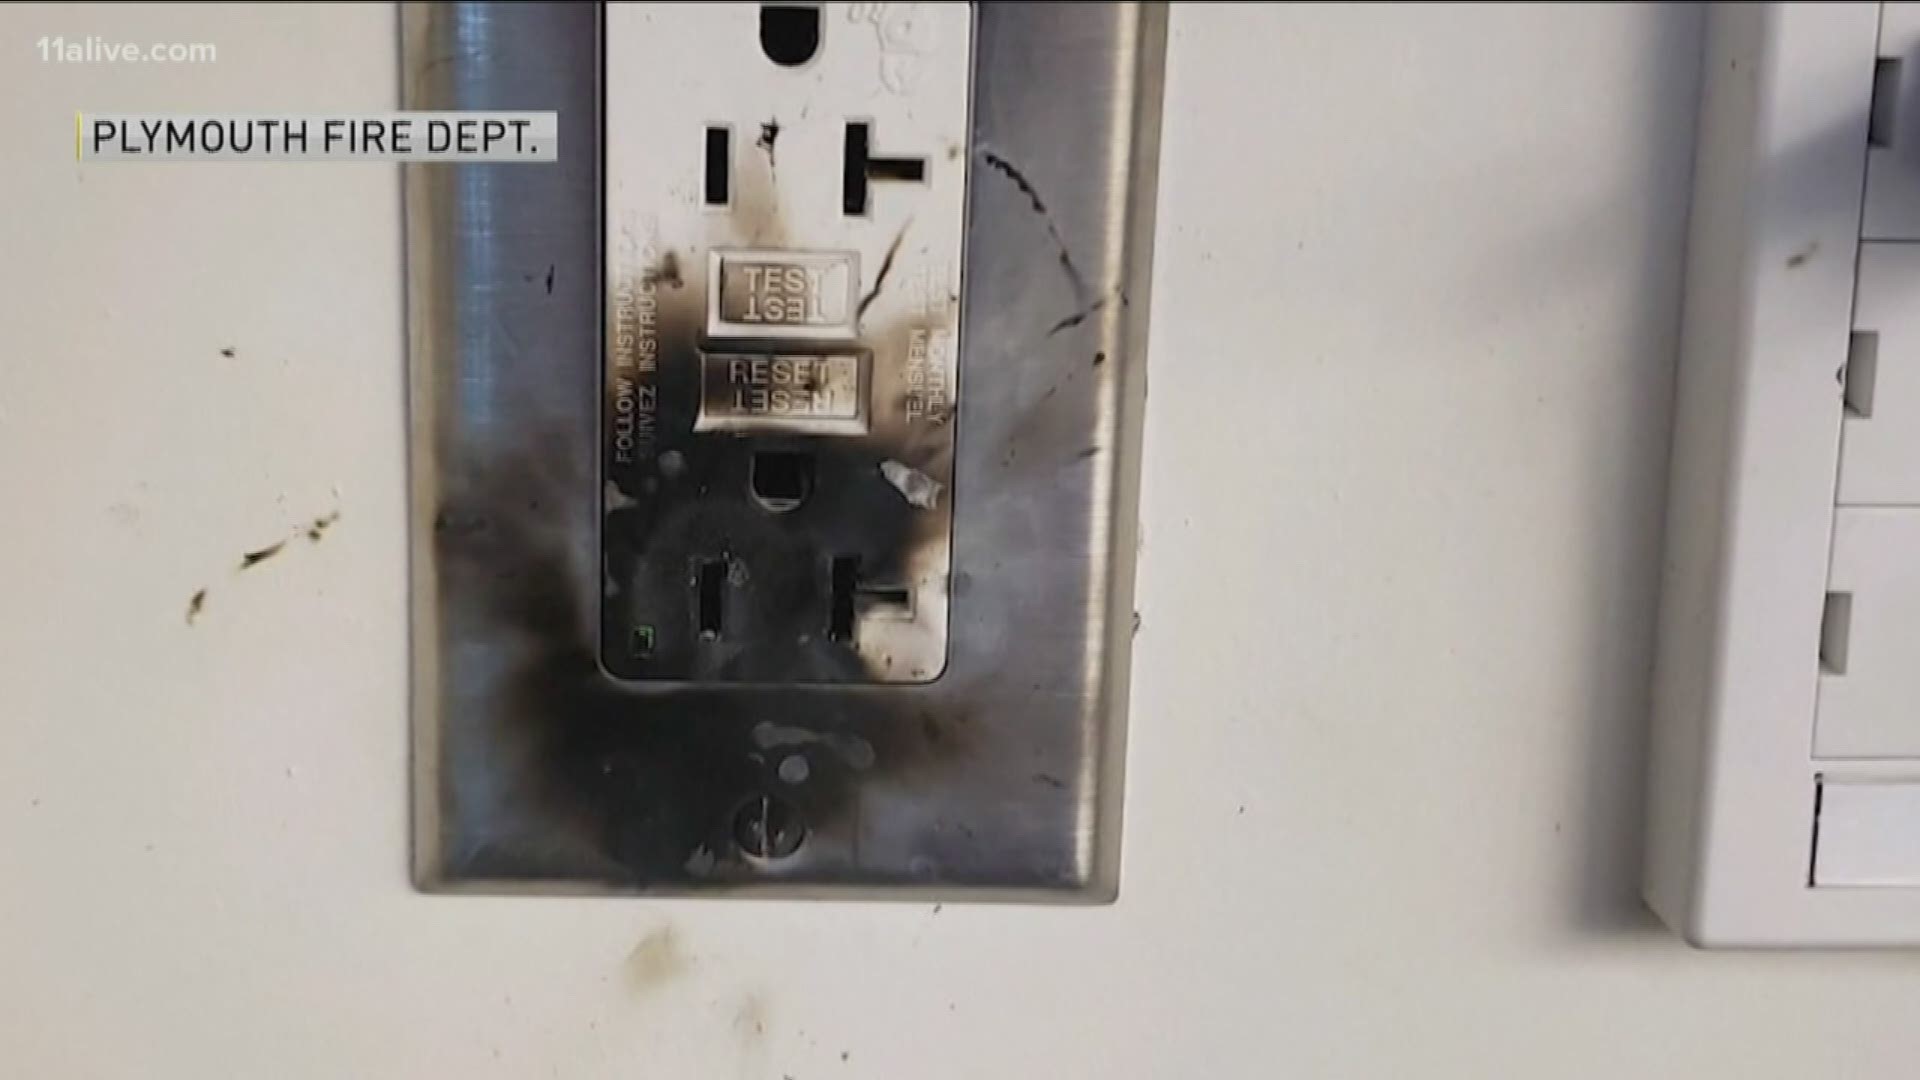 The new challenge, which involves sliding a penny between a phone charger and an outlet, went viral in Massachusetts and has caused scorched outlets and a fire.